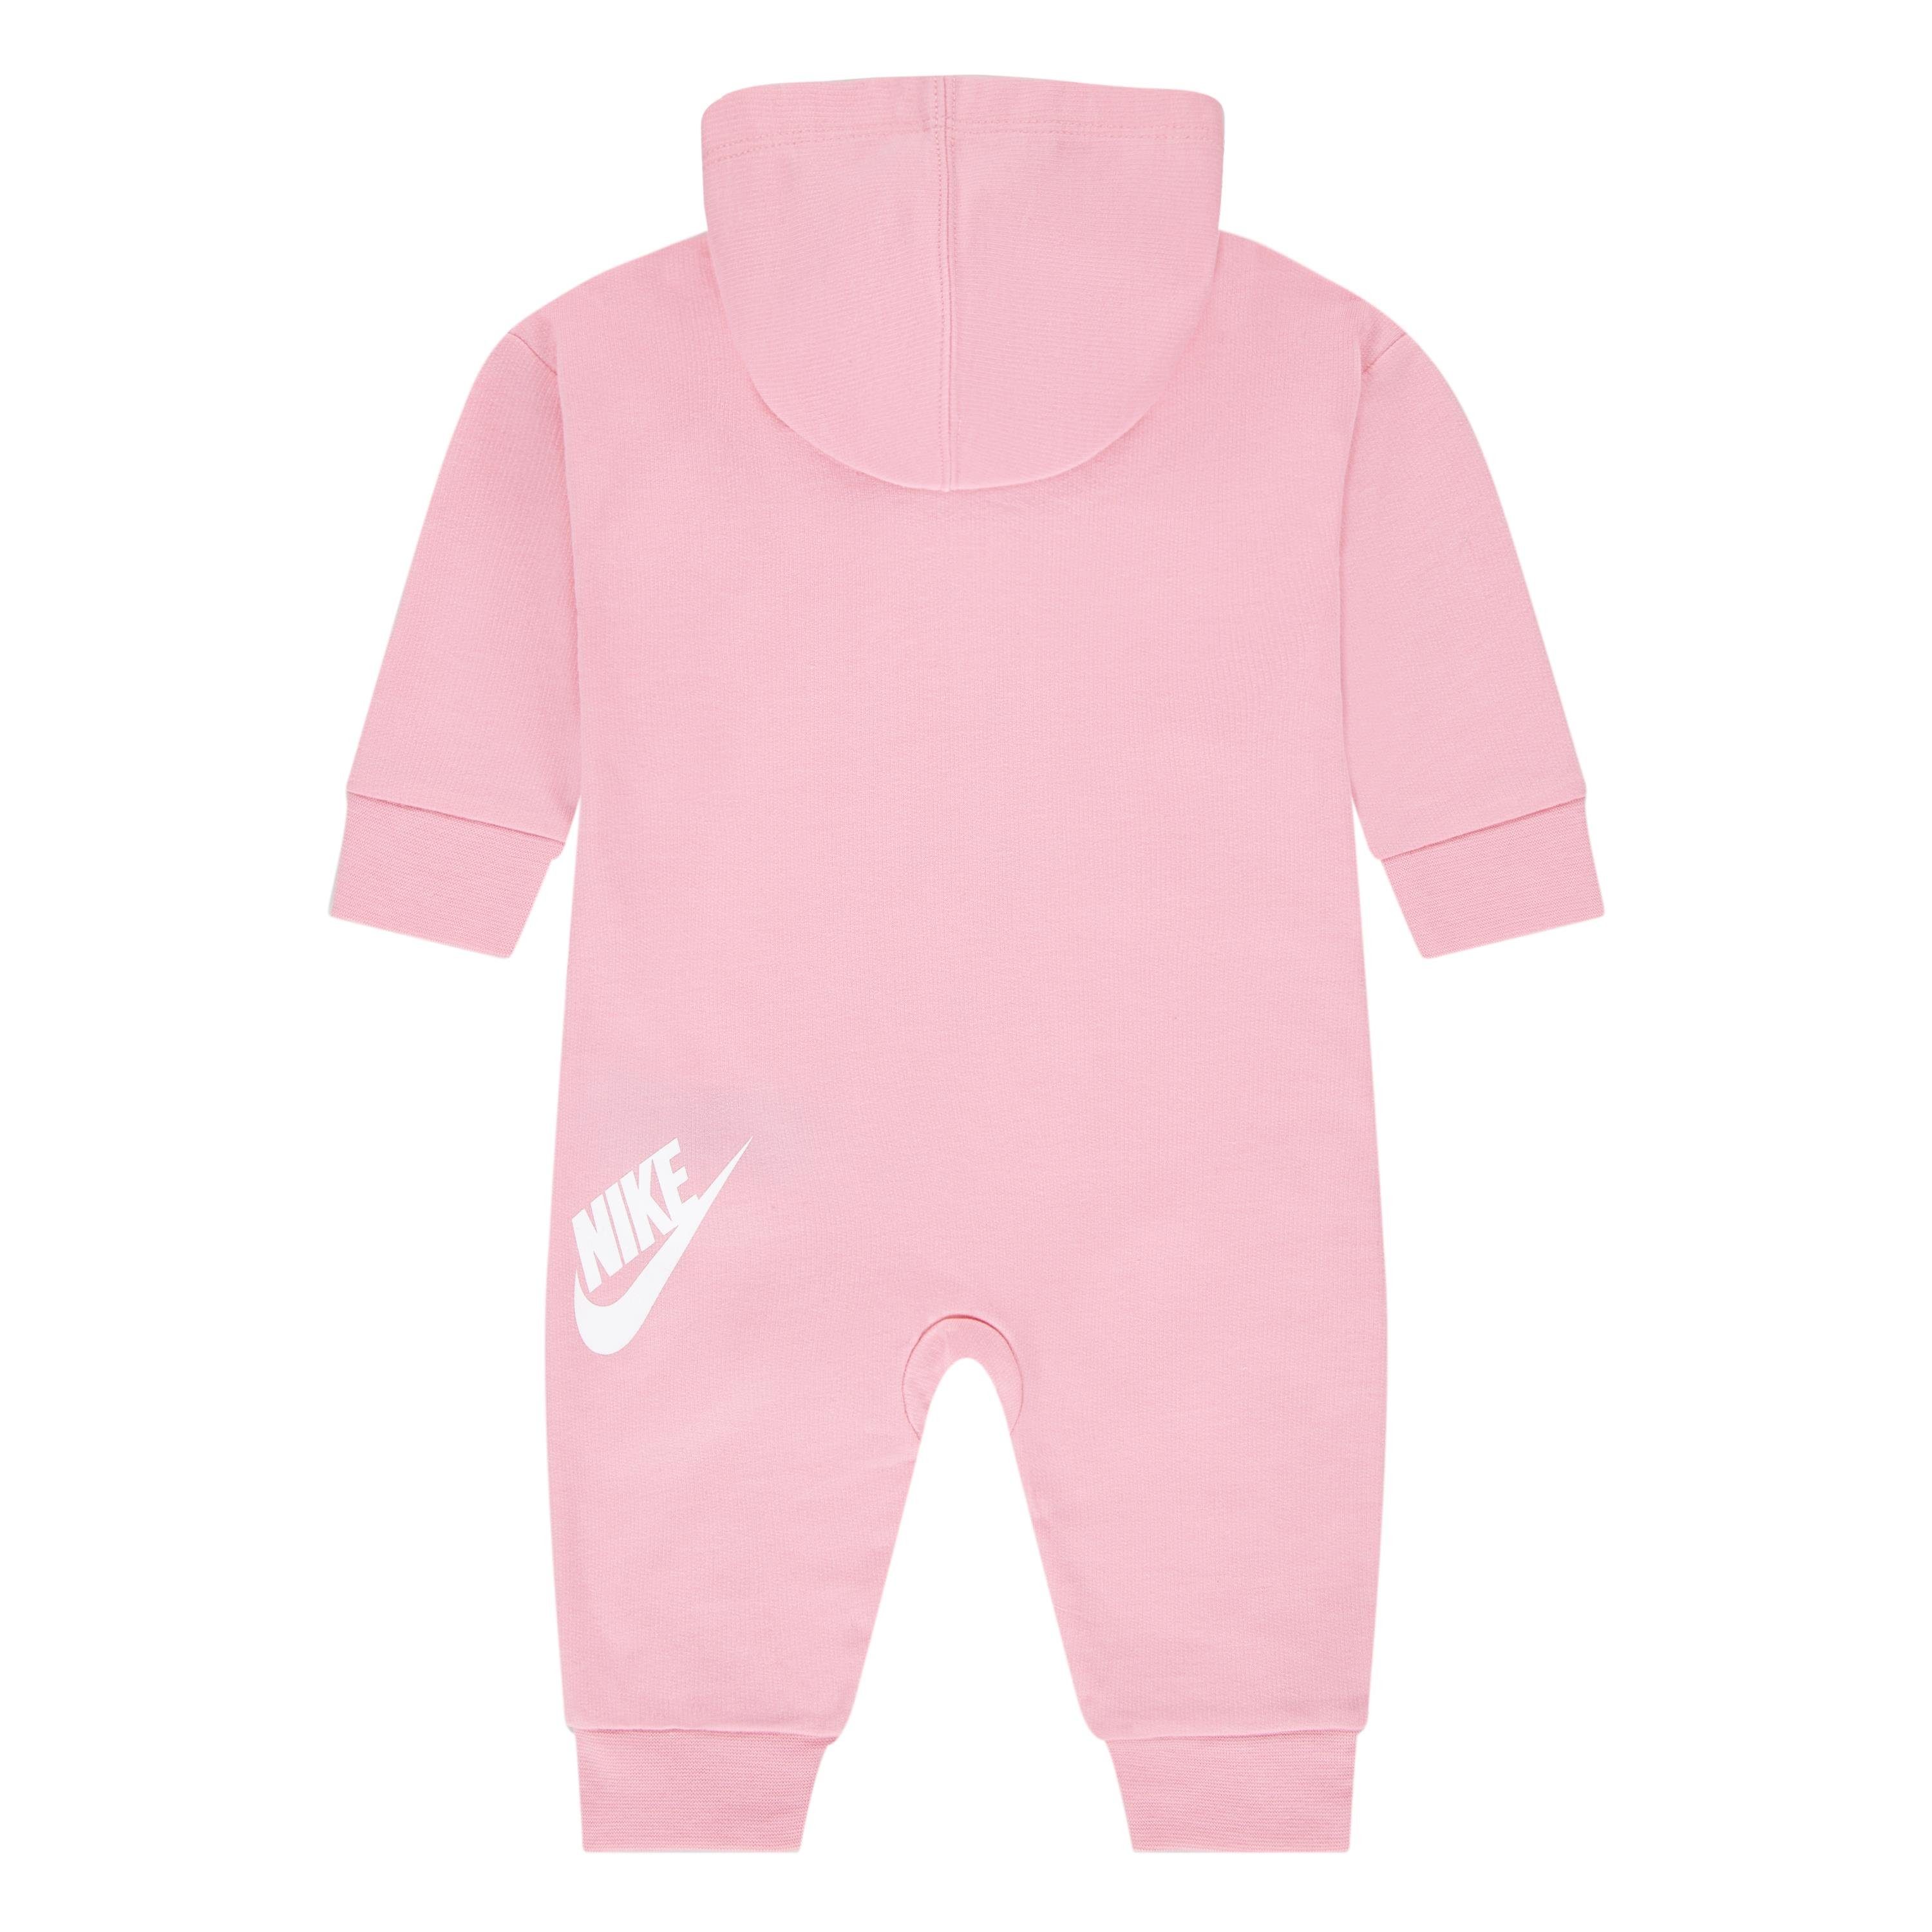 PLAY Sportswear rosa-weiß COVERALL Nike DAY Strampler NKN ALL